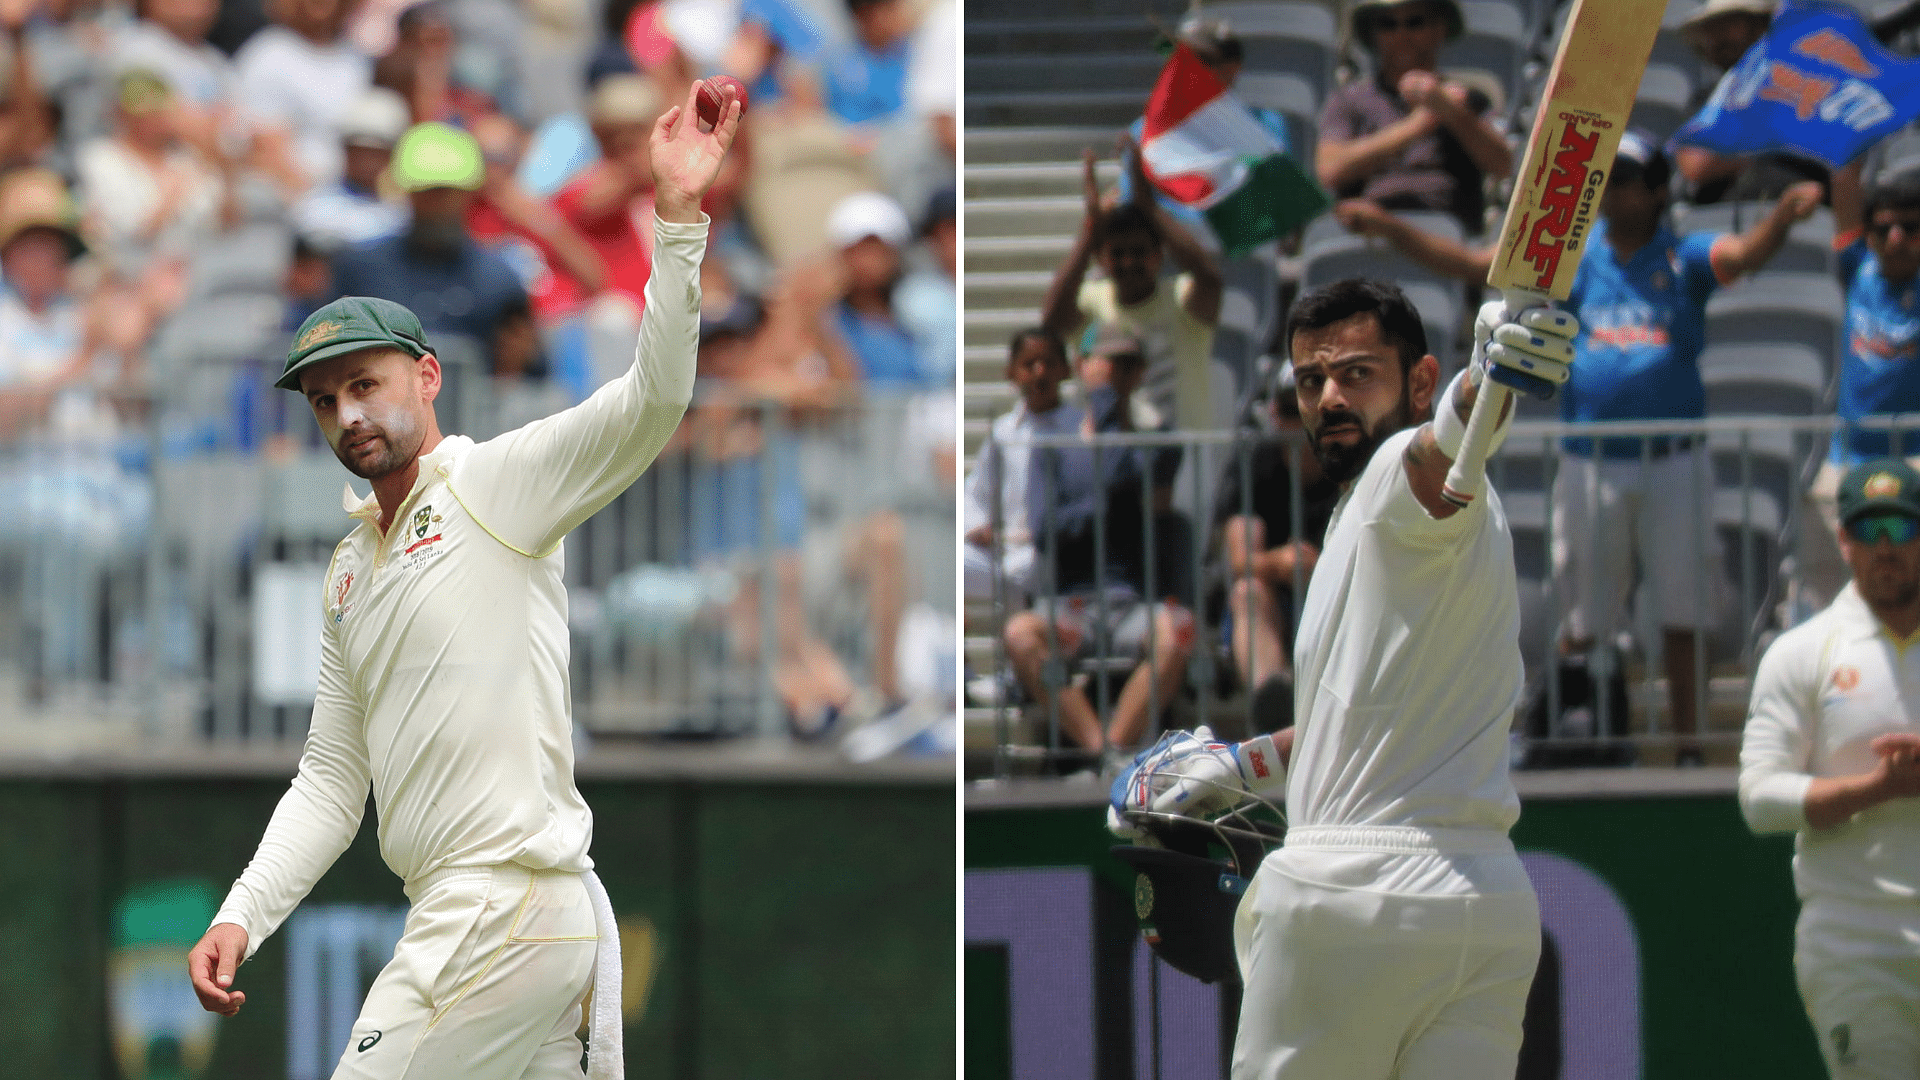 Nathan Lyon picked up 5/67, while Virat Kohli reached his 25th Test hundred, on Day 3 of the Perth Test between Australia and India.